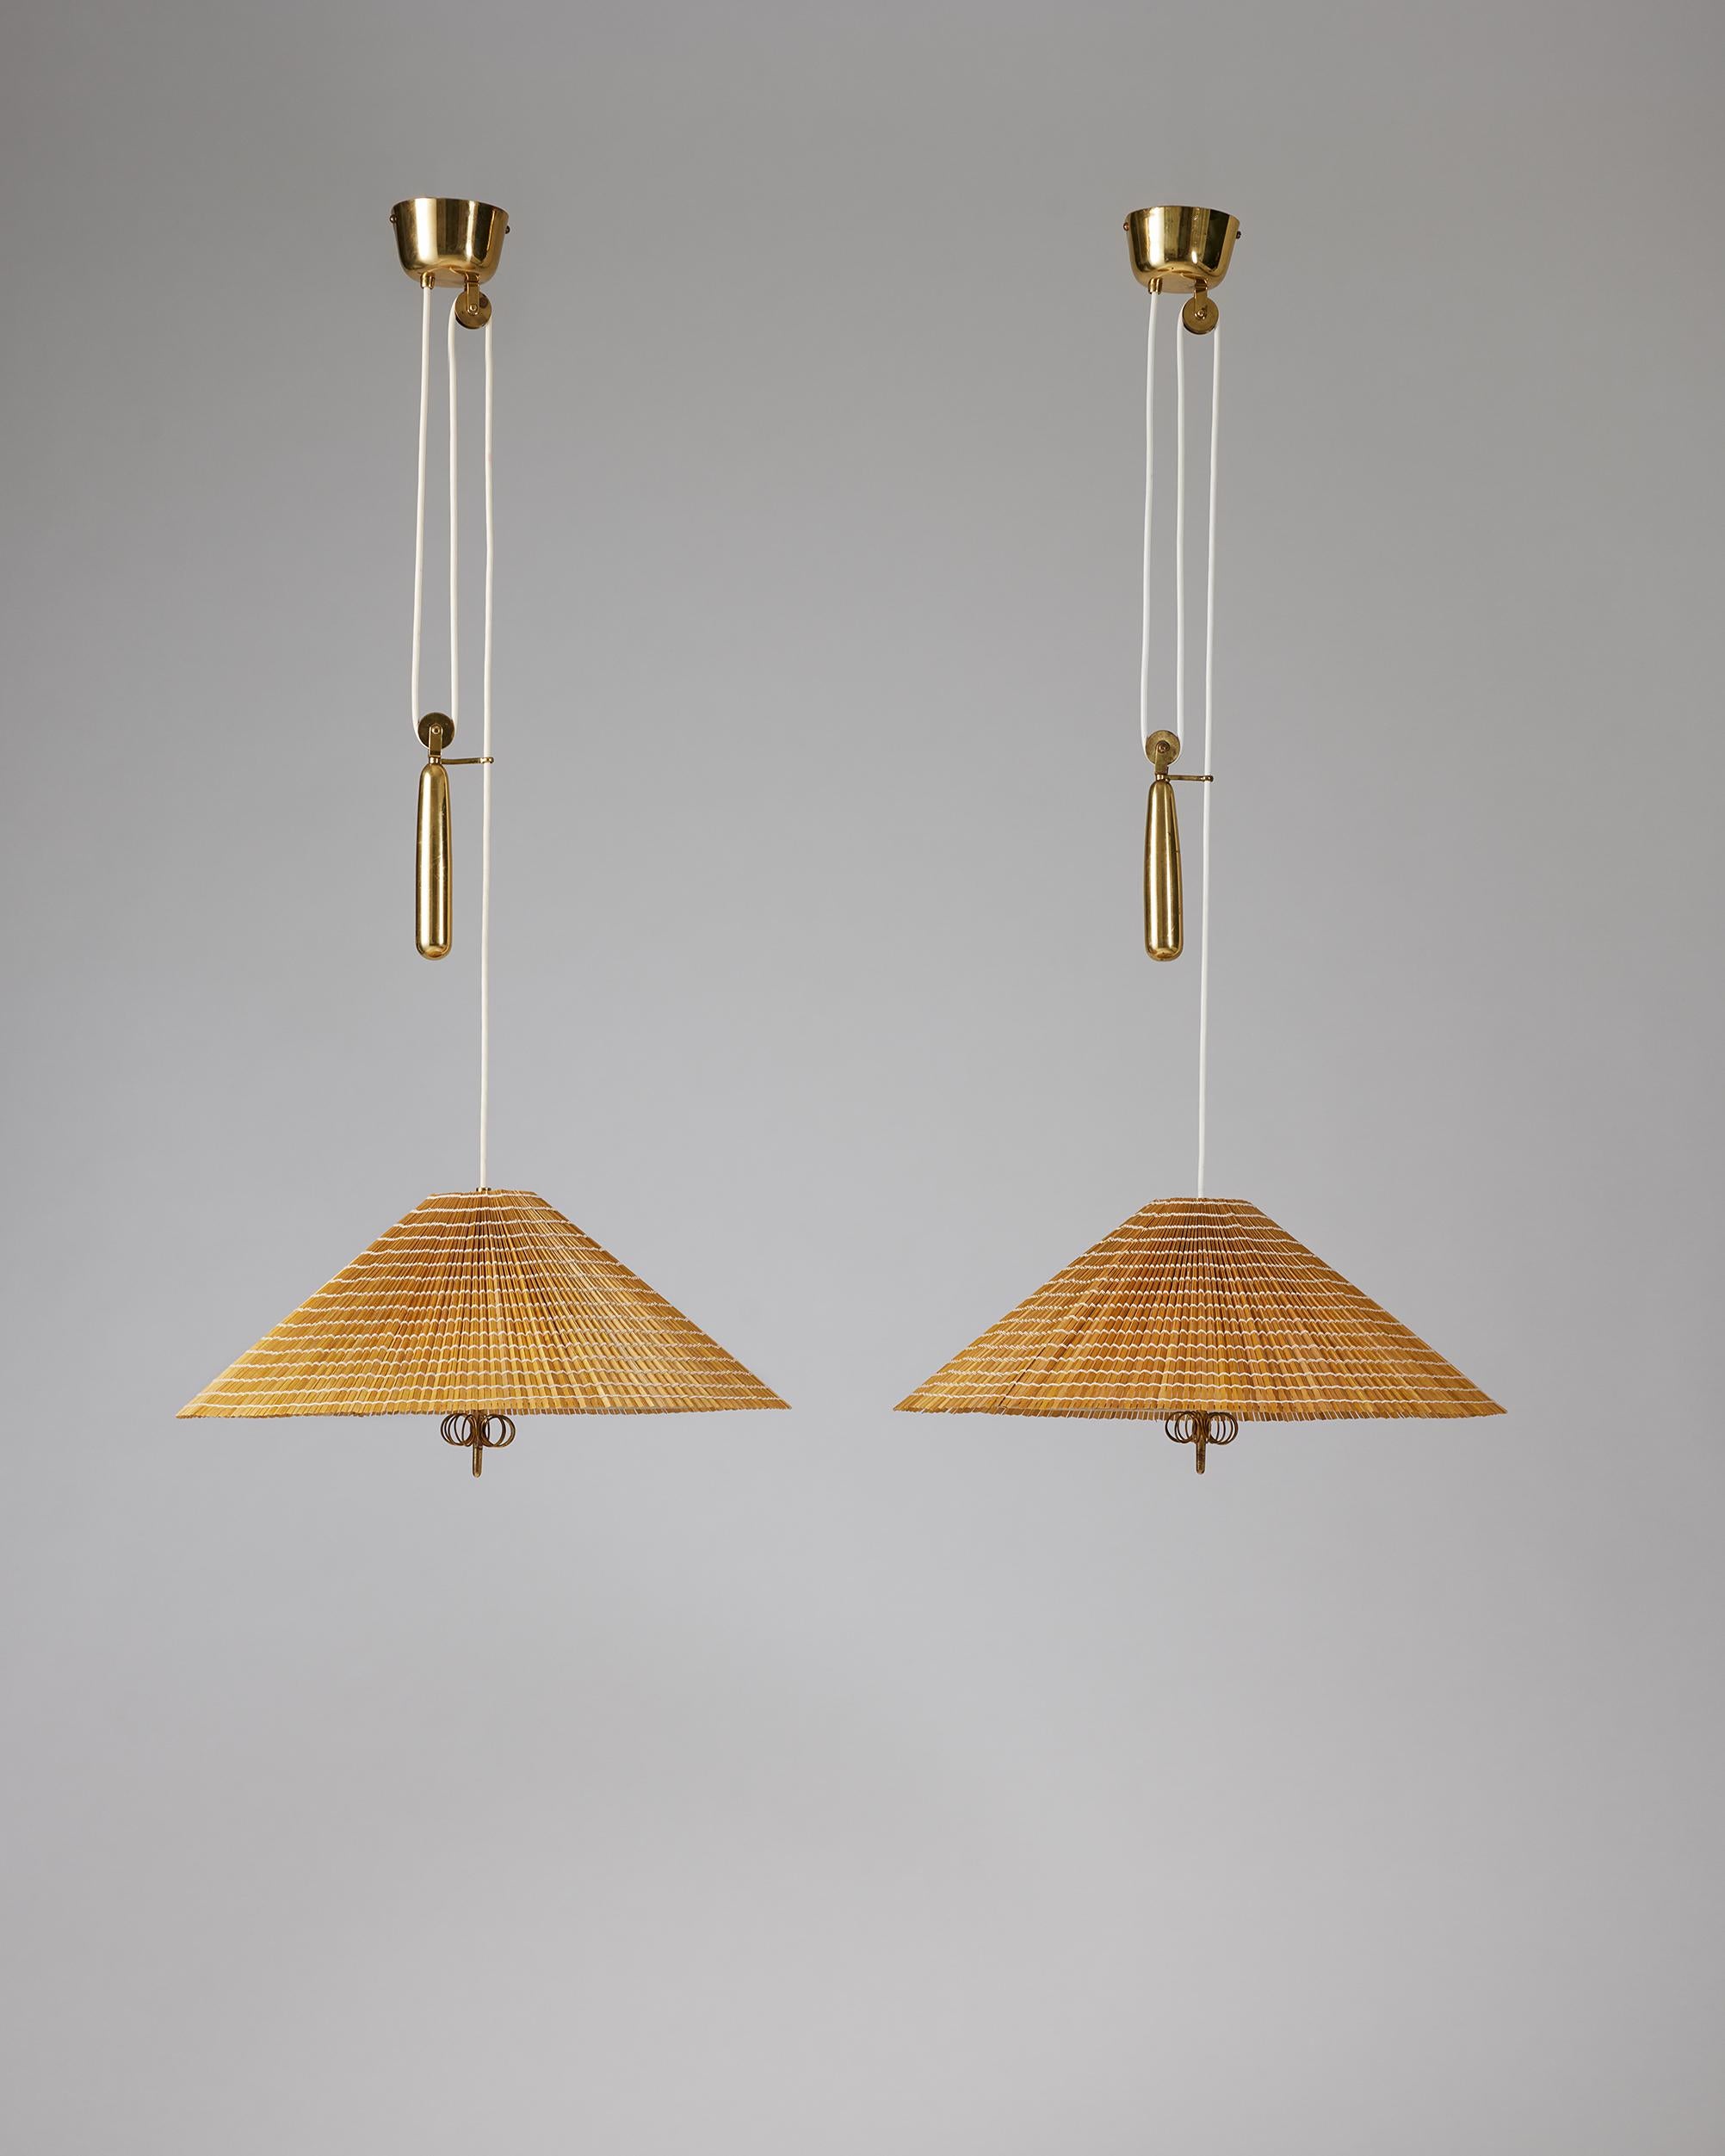 Pair of ceiling lamps model A1967 designed by Paavo Tynell for Oy Taito,
Finland, 1940s

Brass, glass and slatted wood shade.

Stamped.

H: 180 cm
H of shade: 31 cm
W: 52 cm.